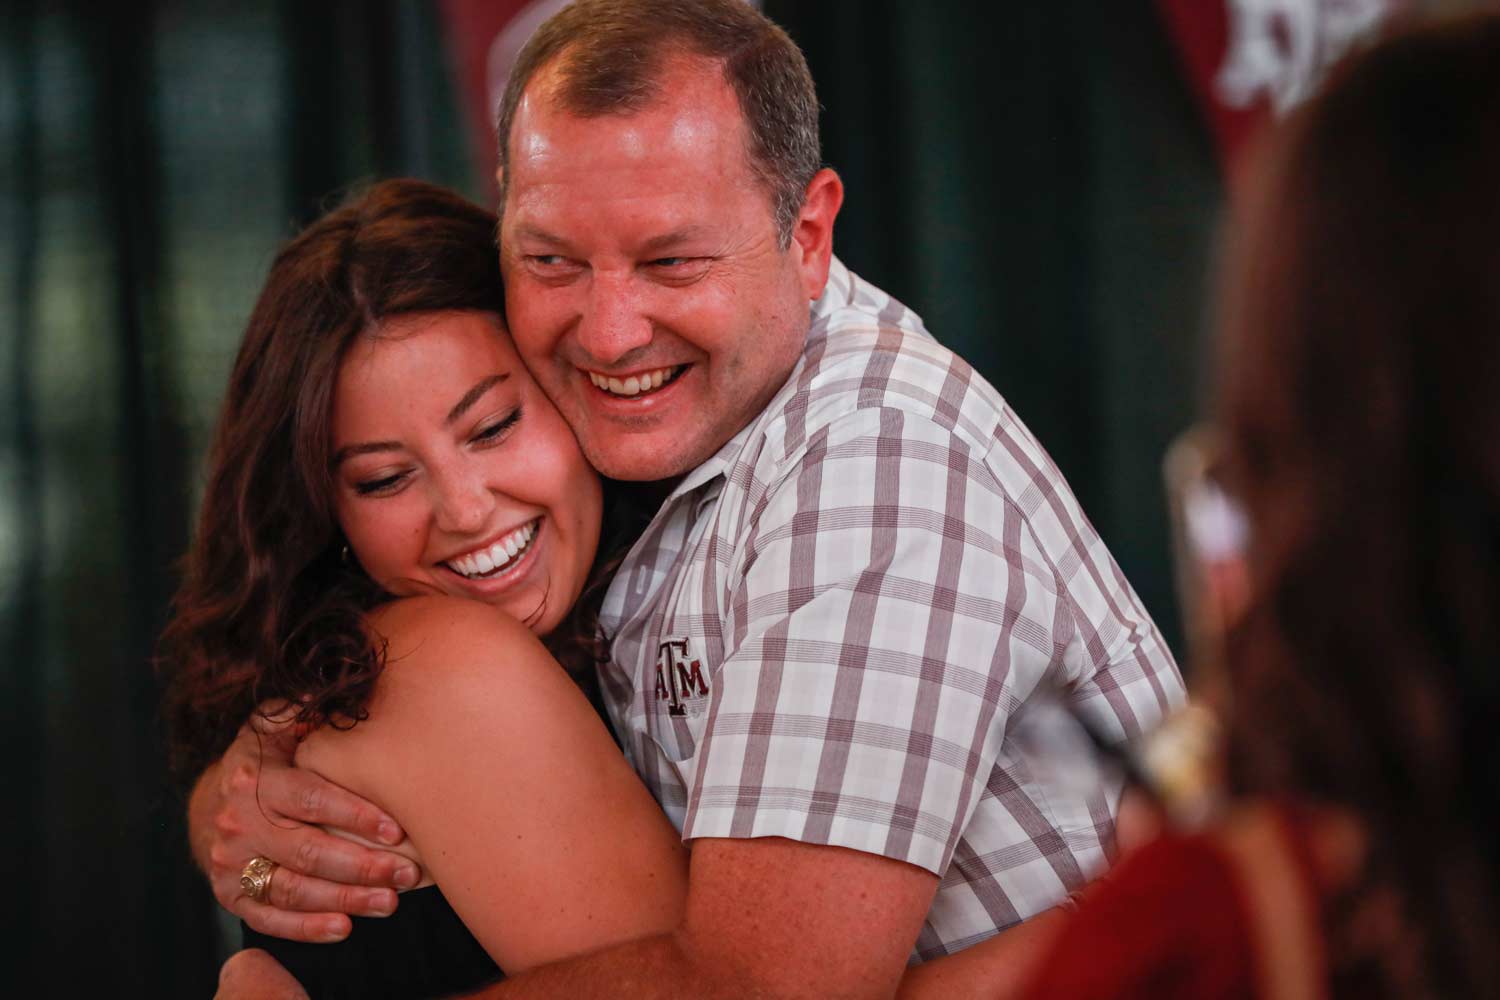 Texas A&M student and family member hugging on ring day